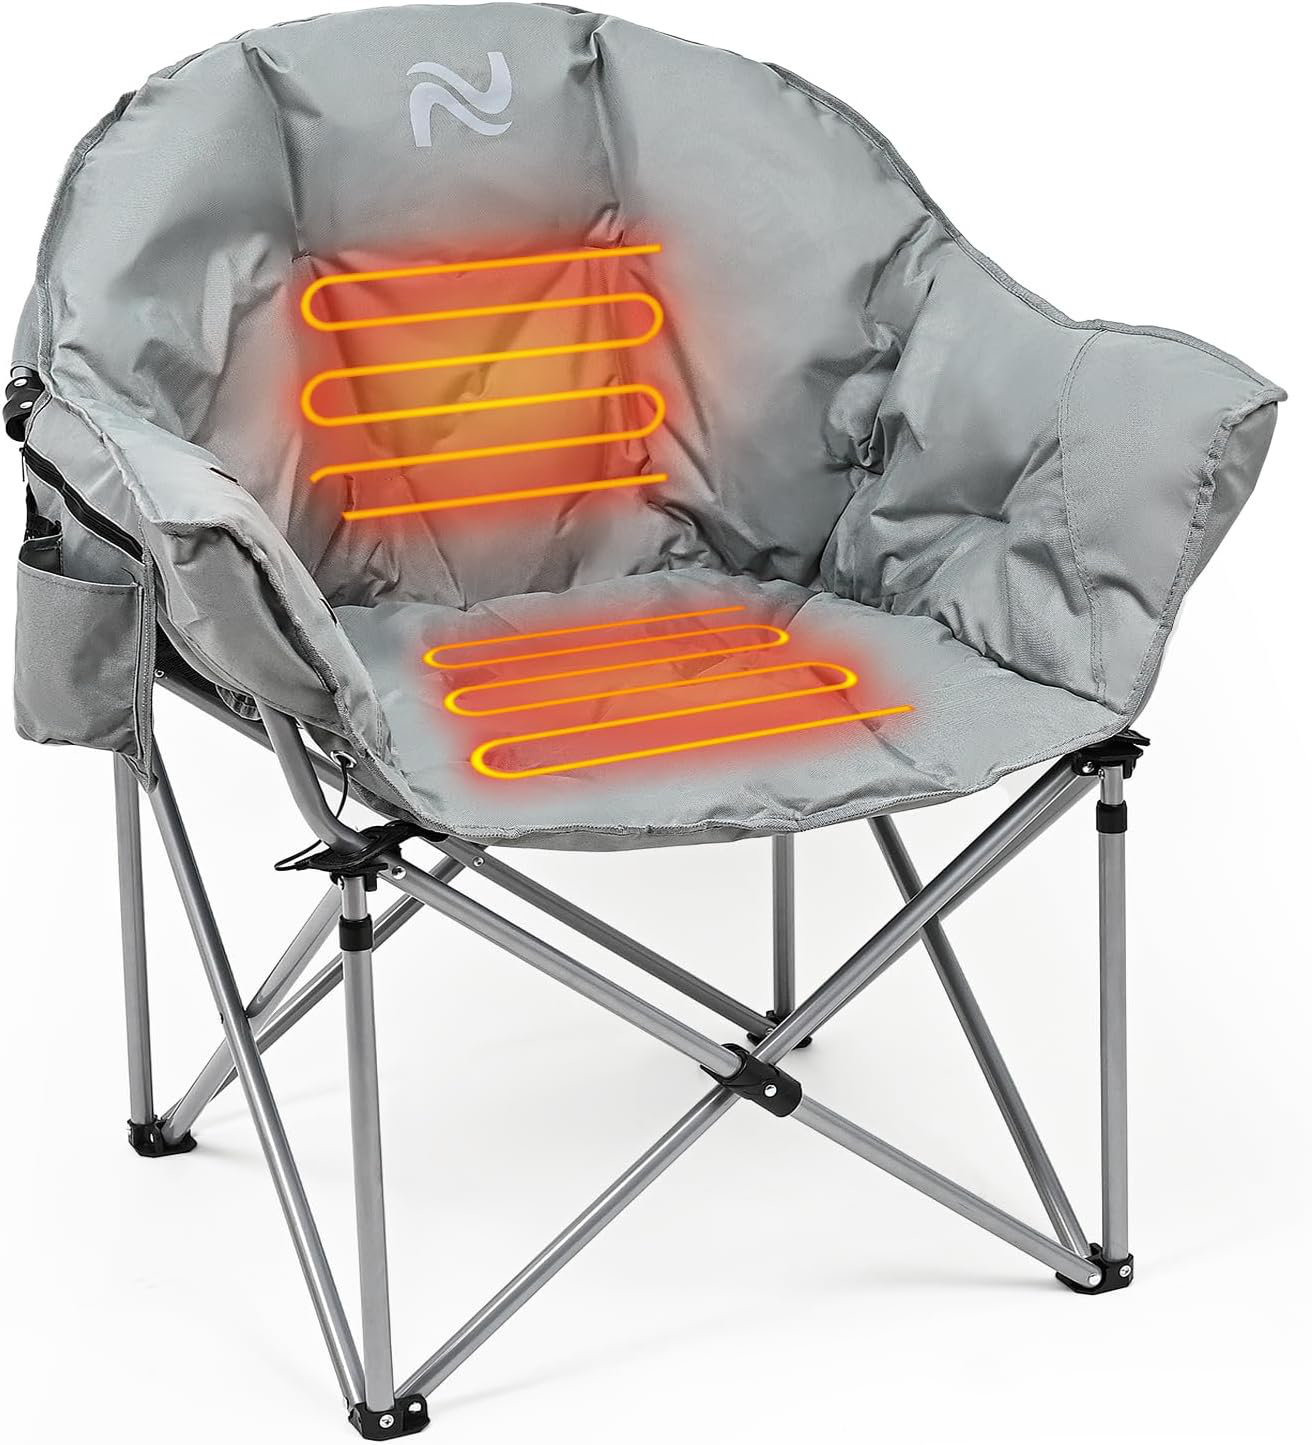 ShangQuan WuLiu Heated Camping Chair with 3 Heat Levels, Oversized Portable  Folding Heated Chair with Carry Bag